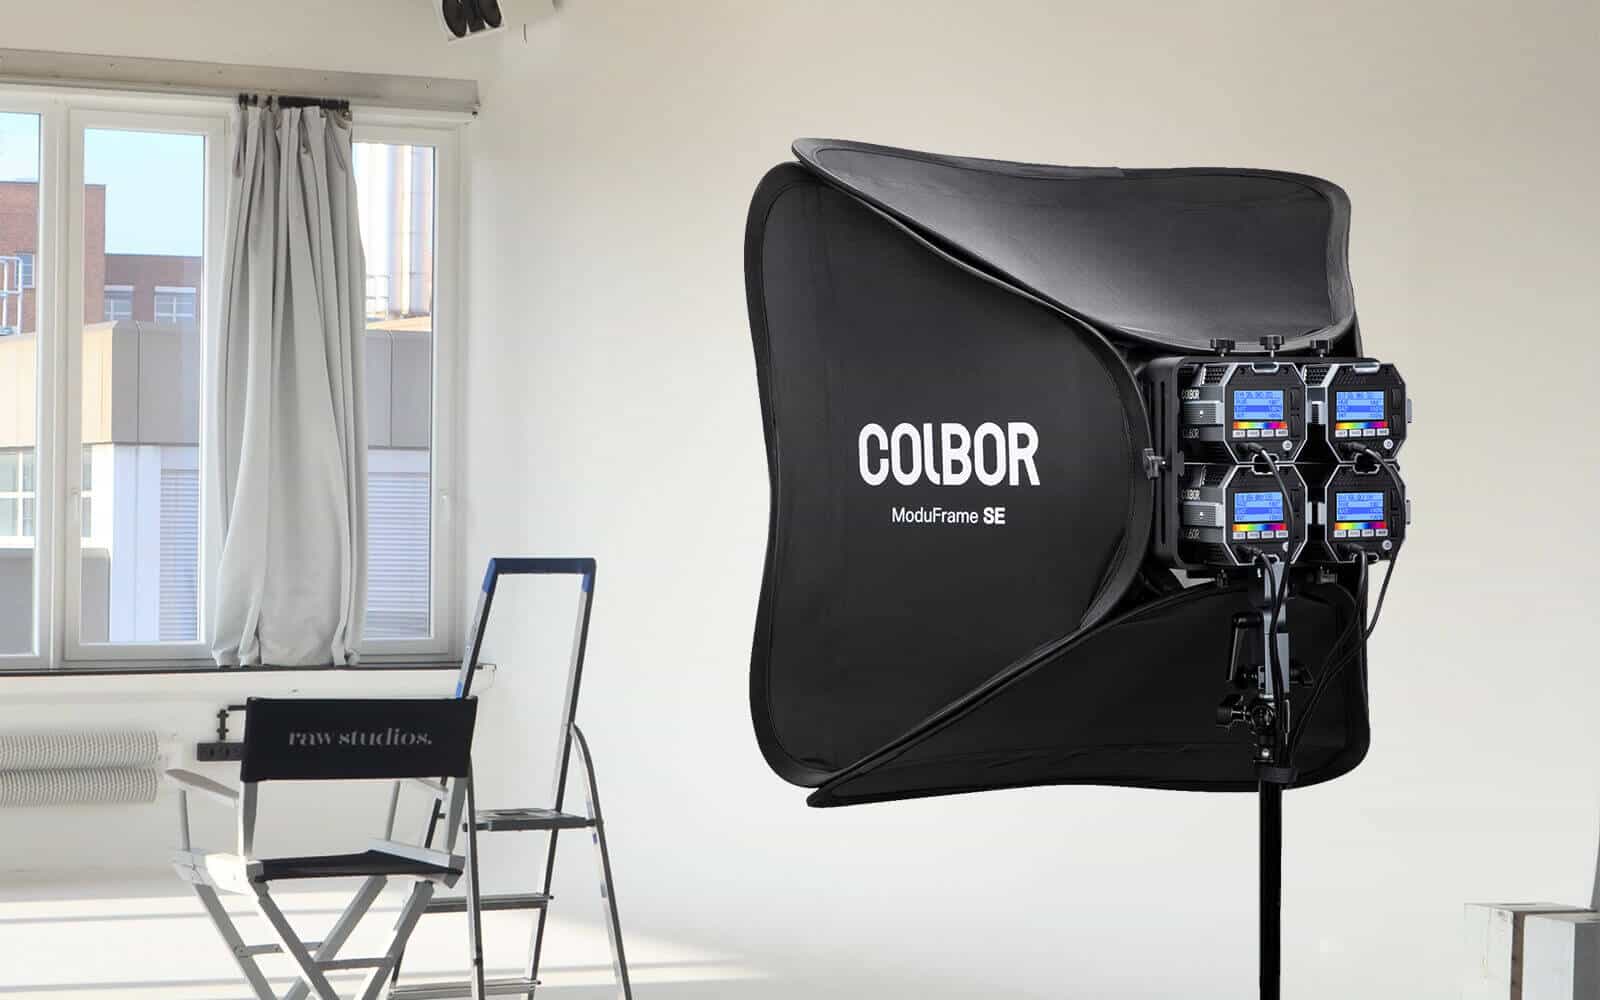 Use of COLBOR ModuFrame SE Streamlined Quick-Release Softbox